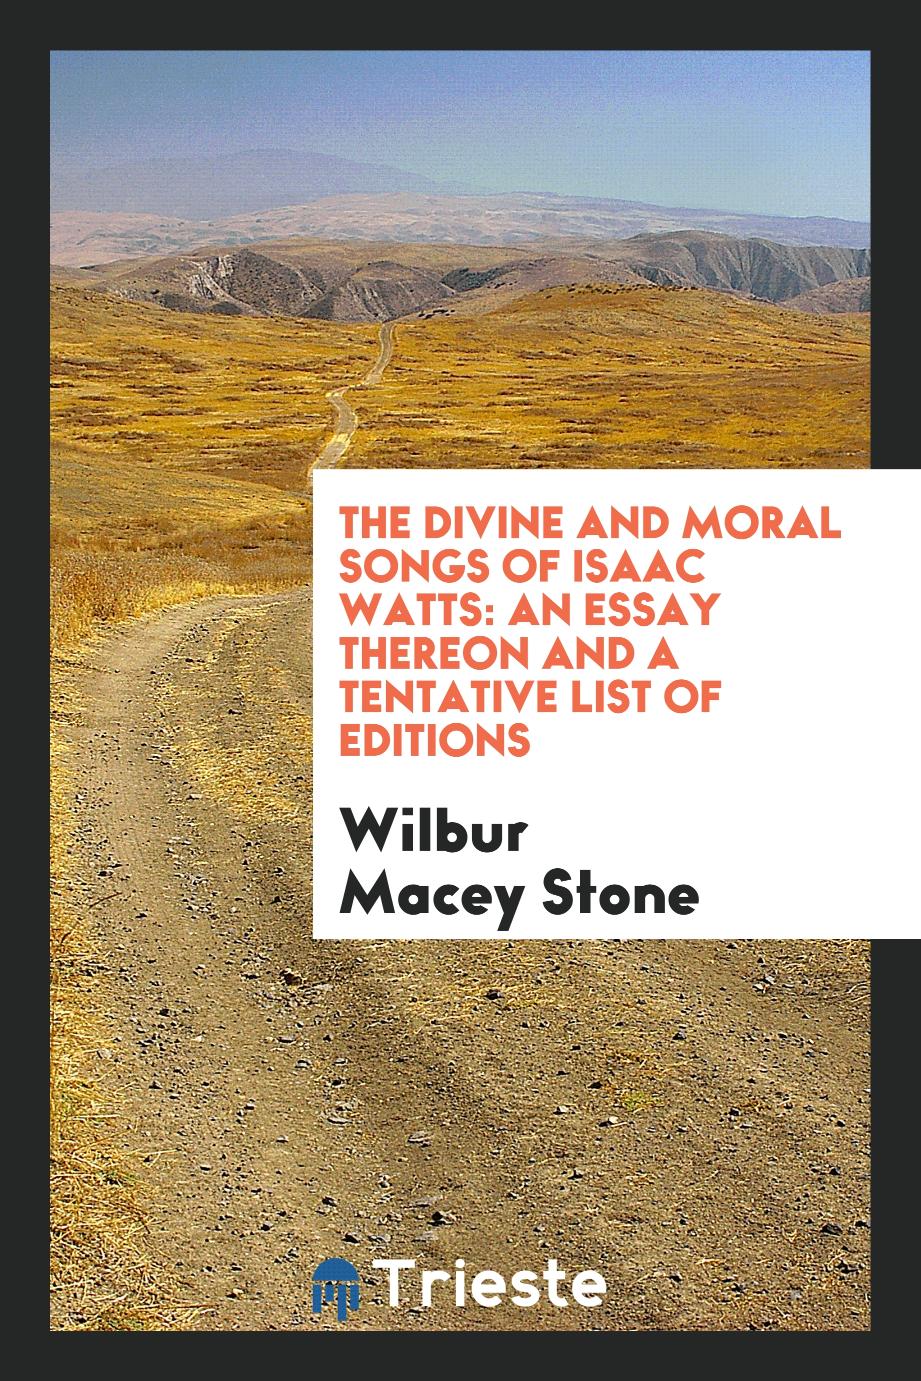 The Divine and Moral Songs of Isaac Watts: An Essay Thereon and a Tentative List of Editions